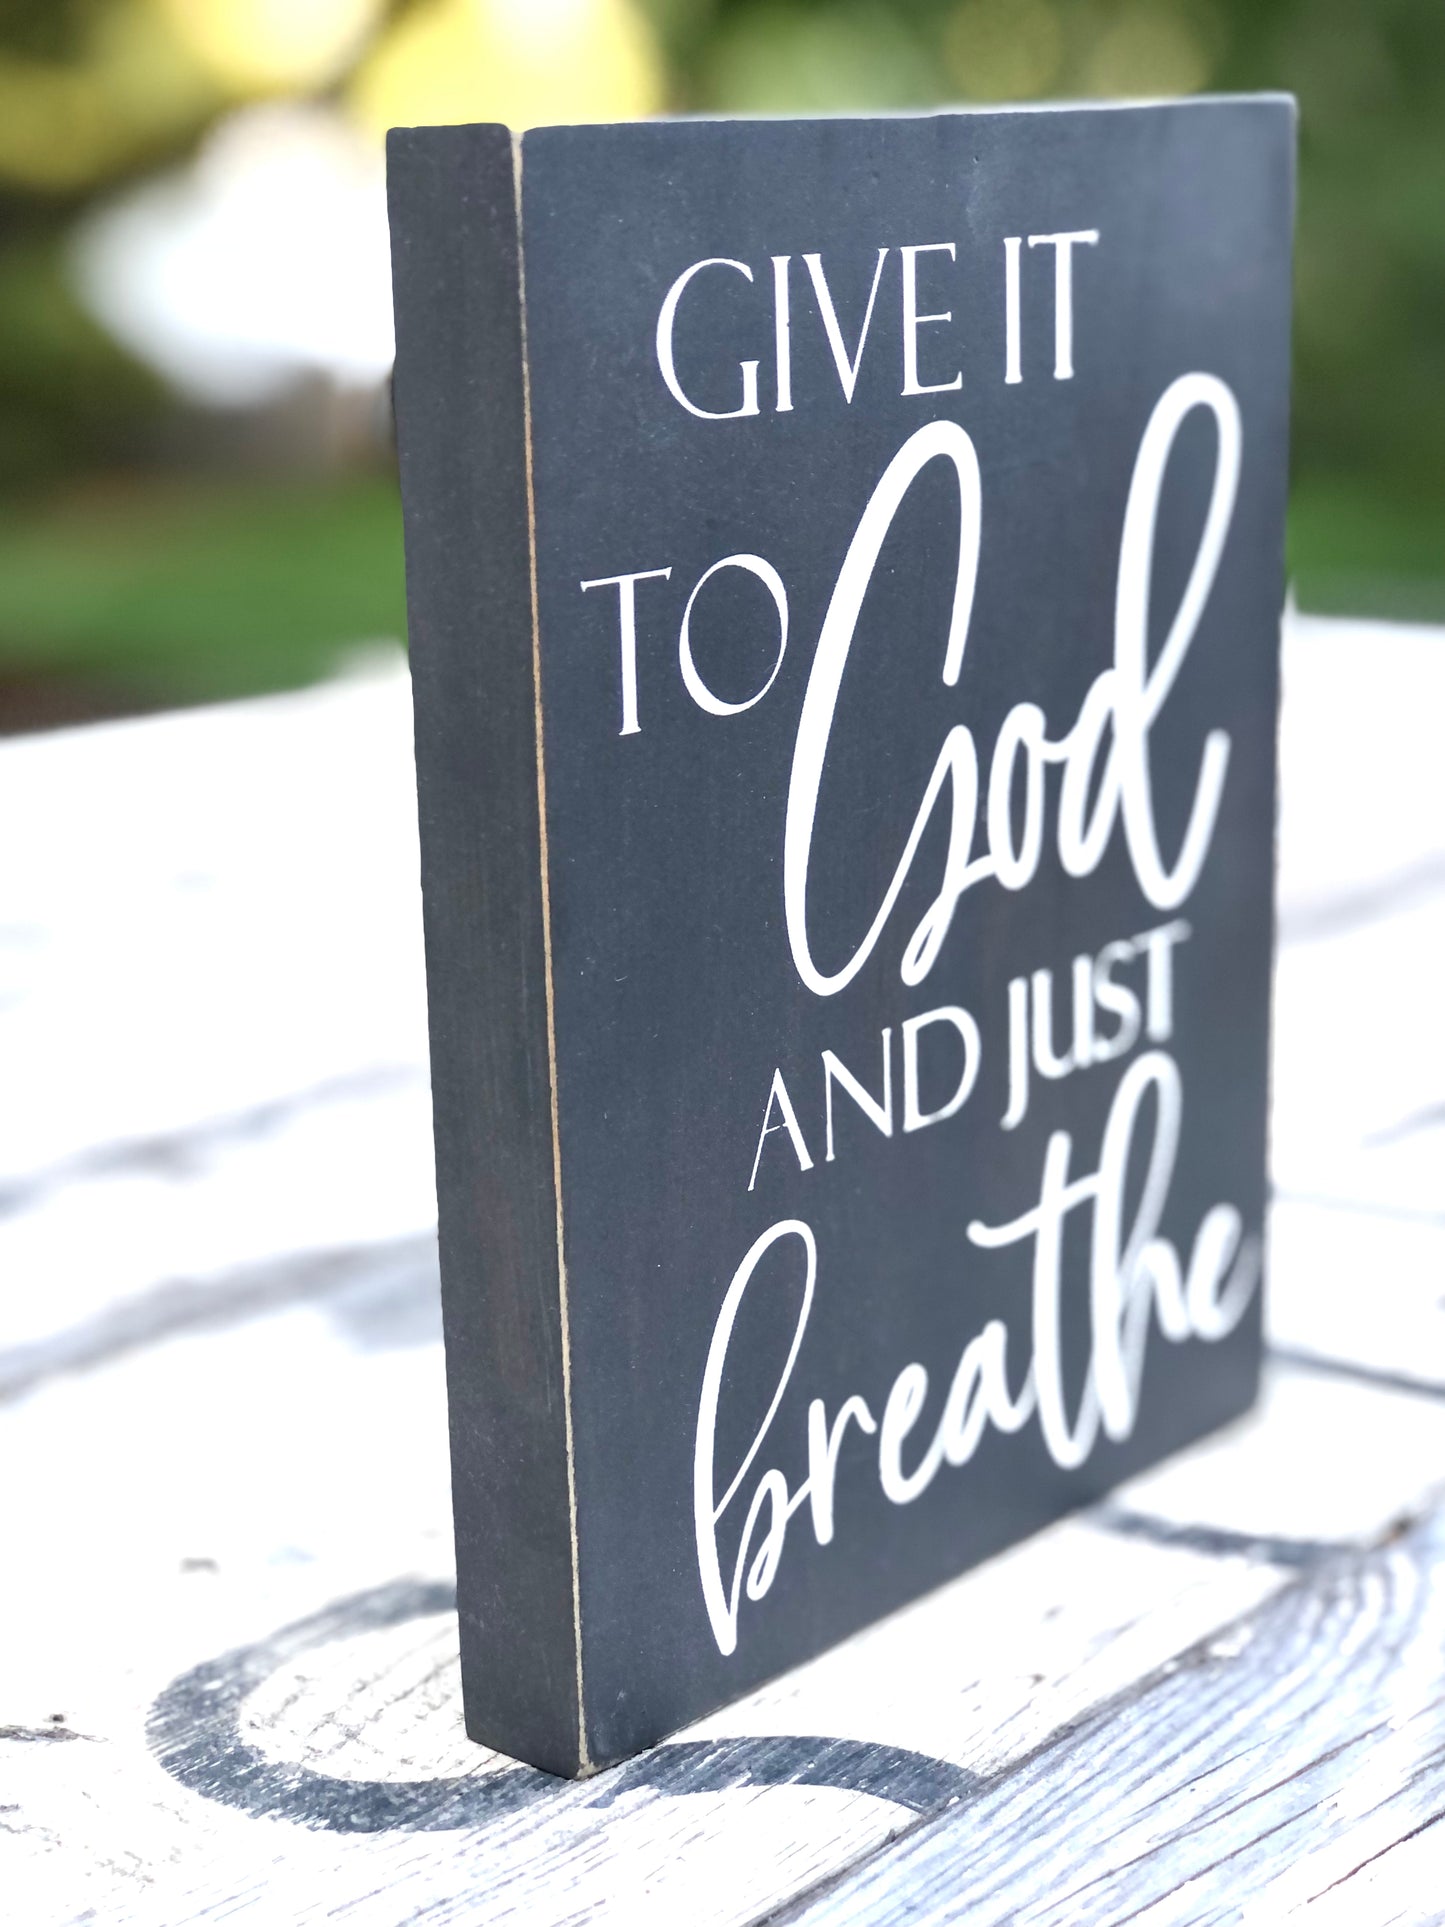 GIVE IT TO GOD AND JUST BREATHE - WOOD SIGN